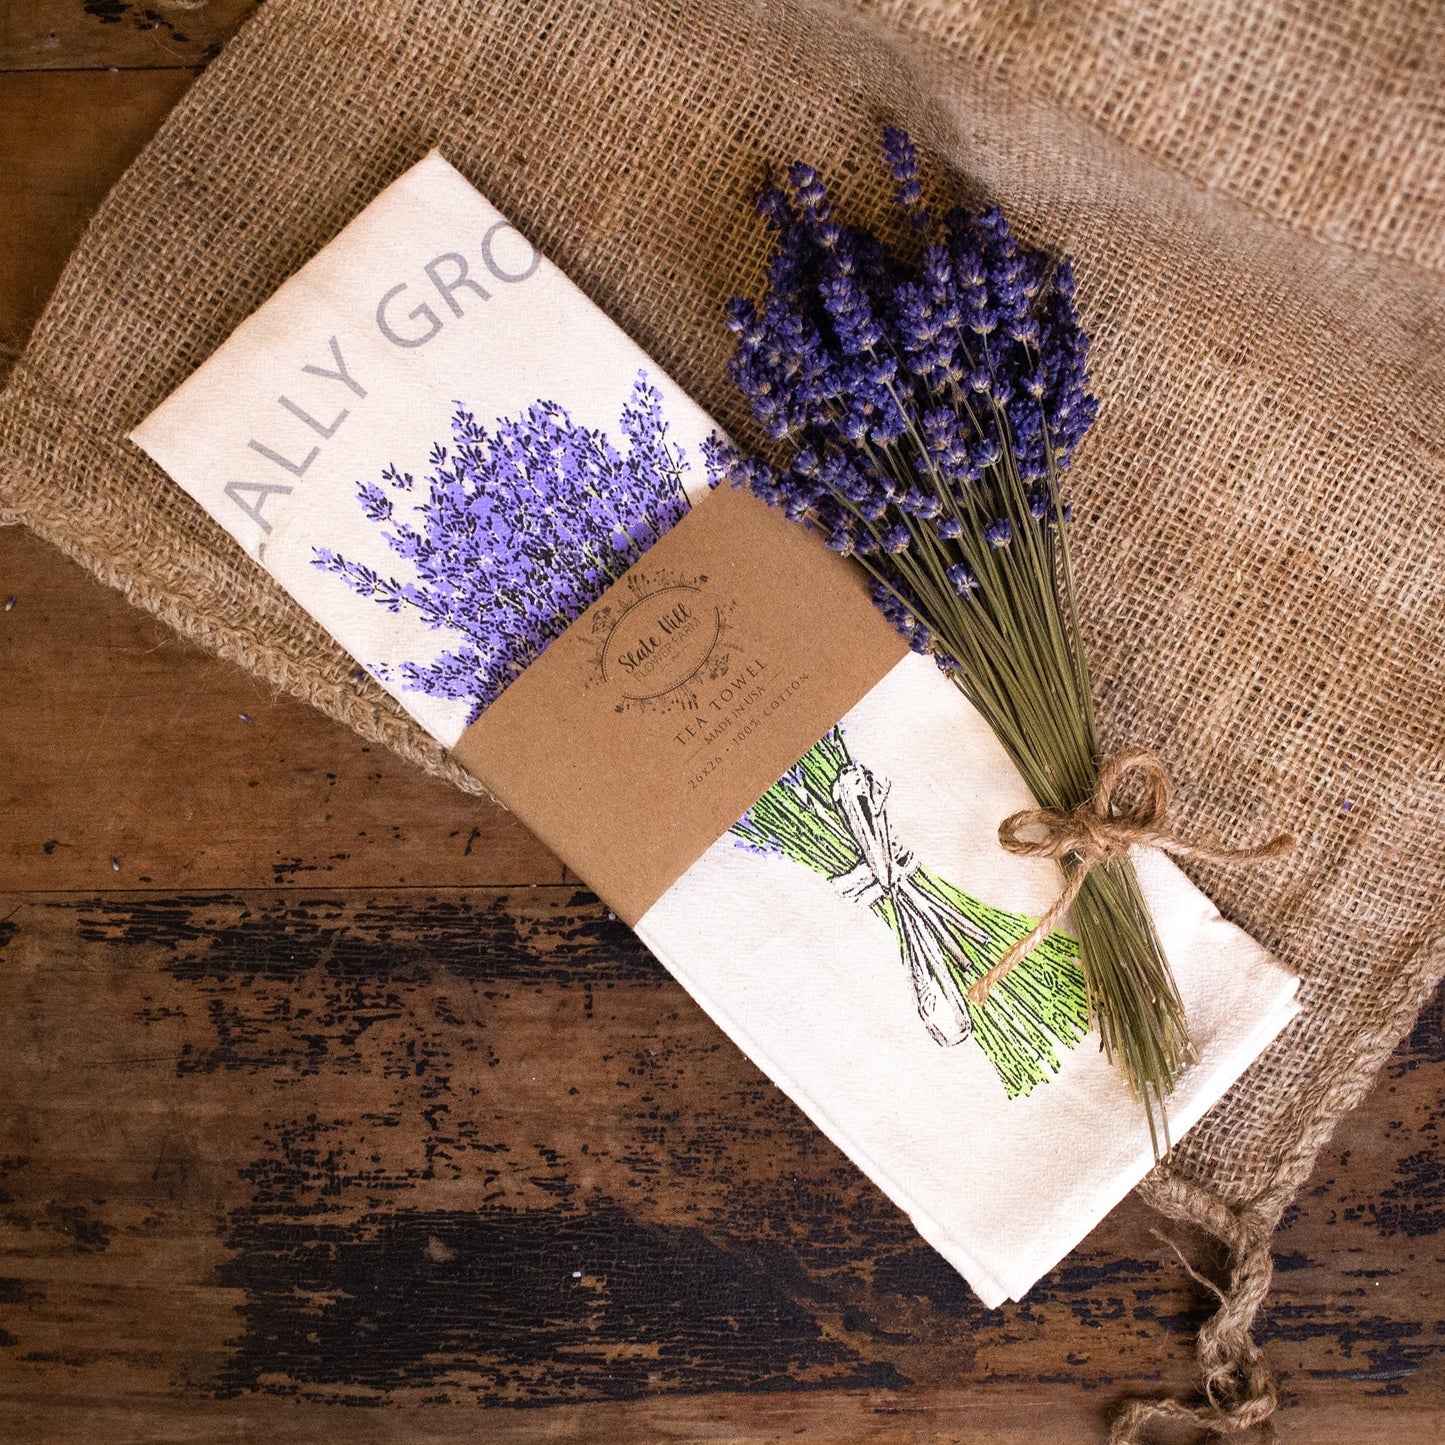 "Locally Grown" Lavender Tea Towel displayed on a burlap covered table. Made by Slate Hill Farm in Sharon Springs, NY.